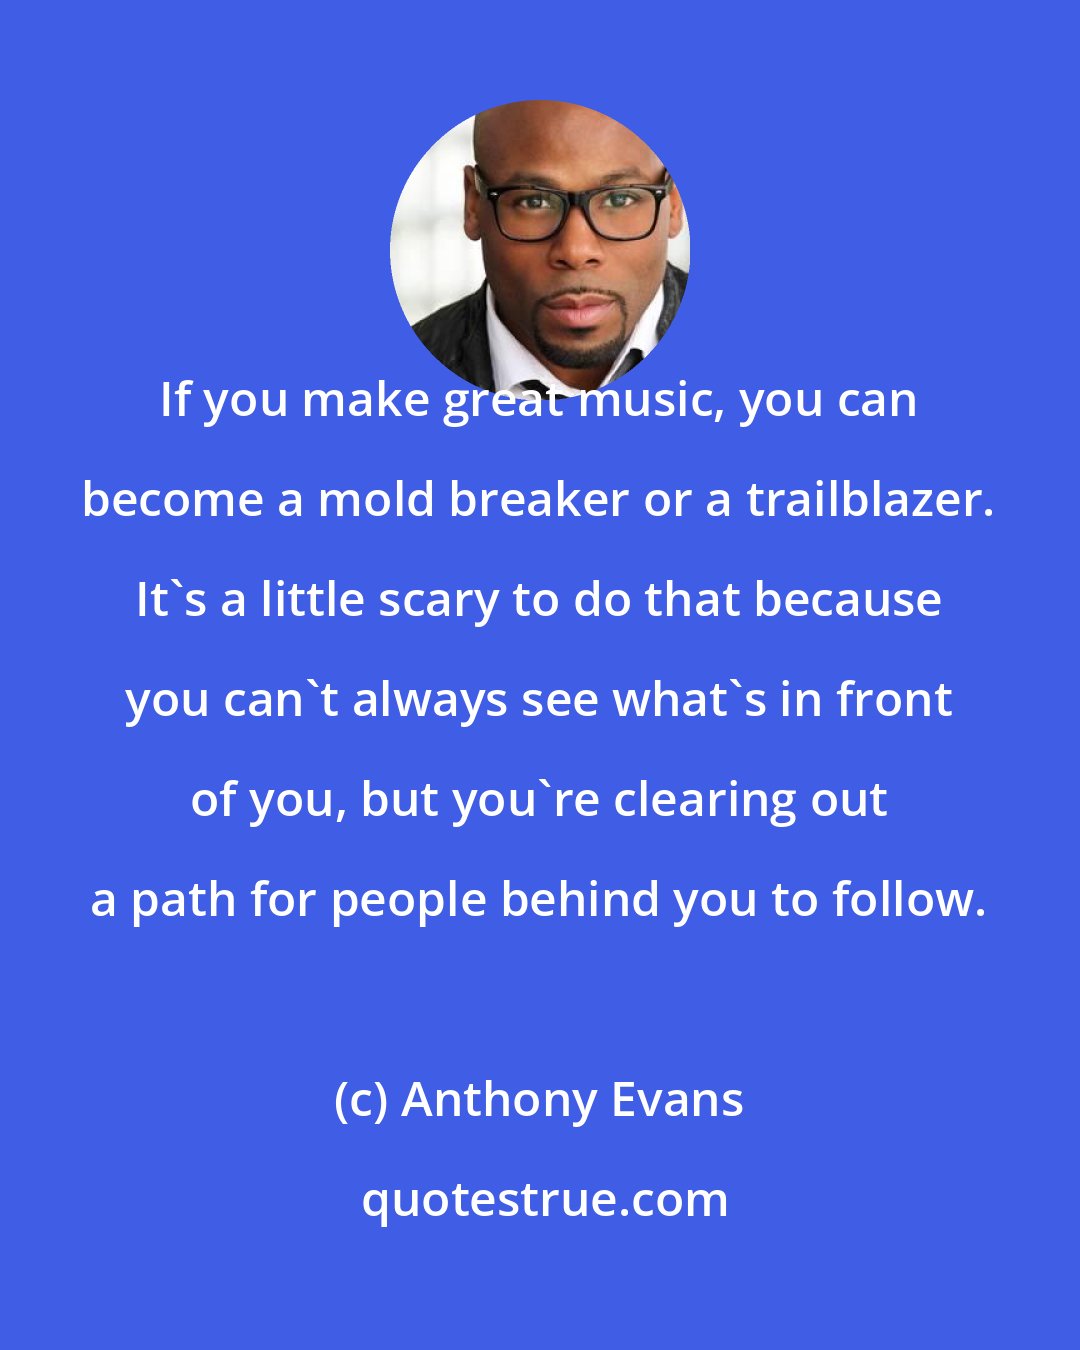 Anthony Evans: If you make great music, you can become a mold breaker or a trailblazer. It's a little scary to do that because you can't always see what's in front of you, but you're clearing out a path for people behind you to follow.